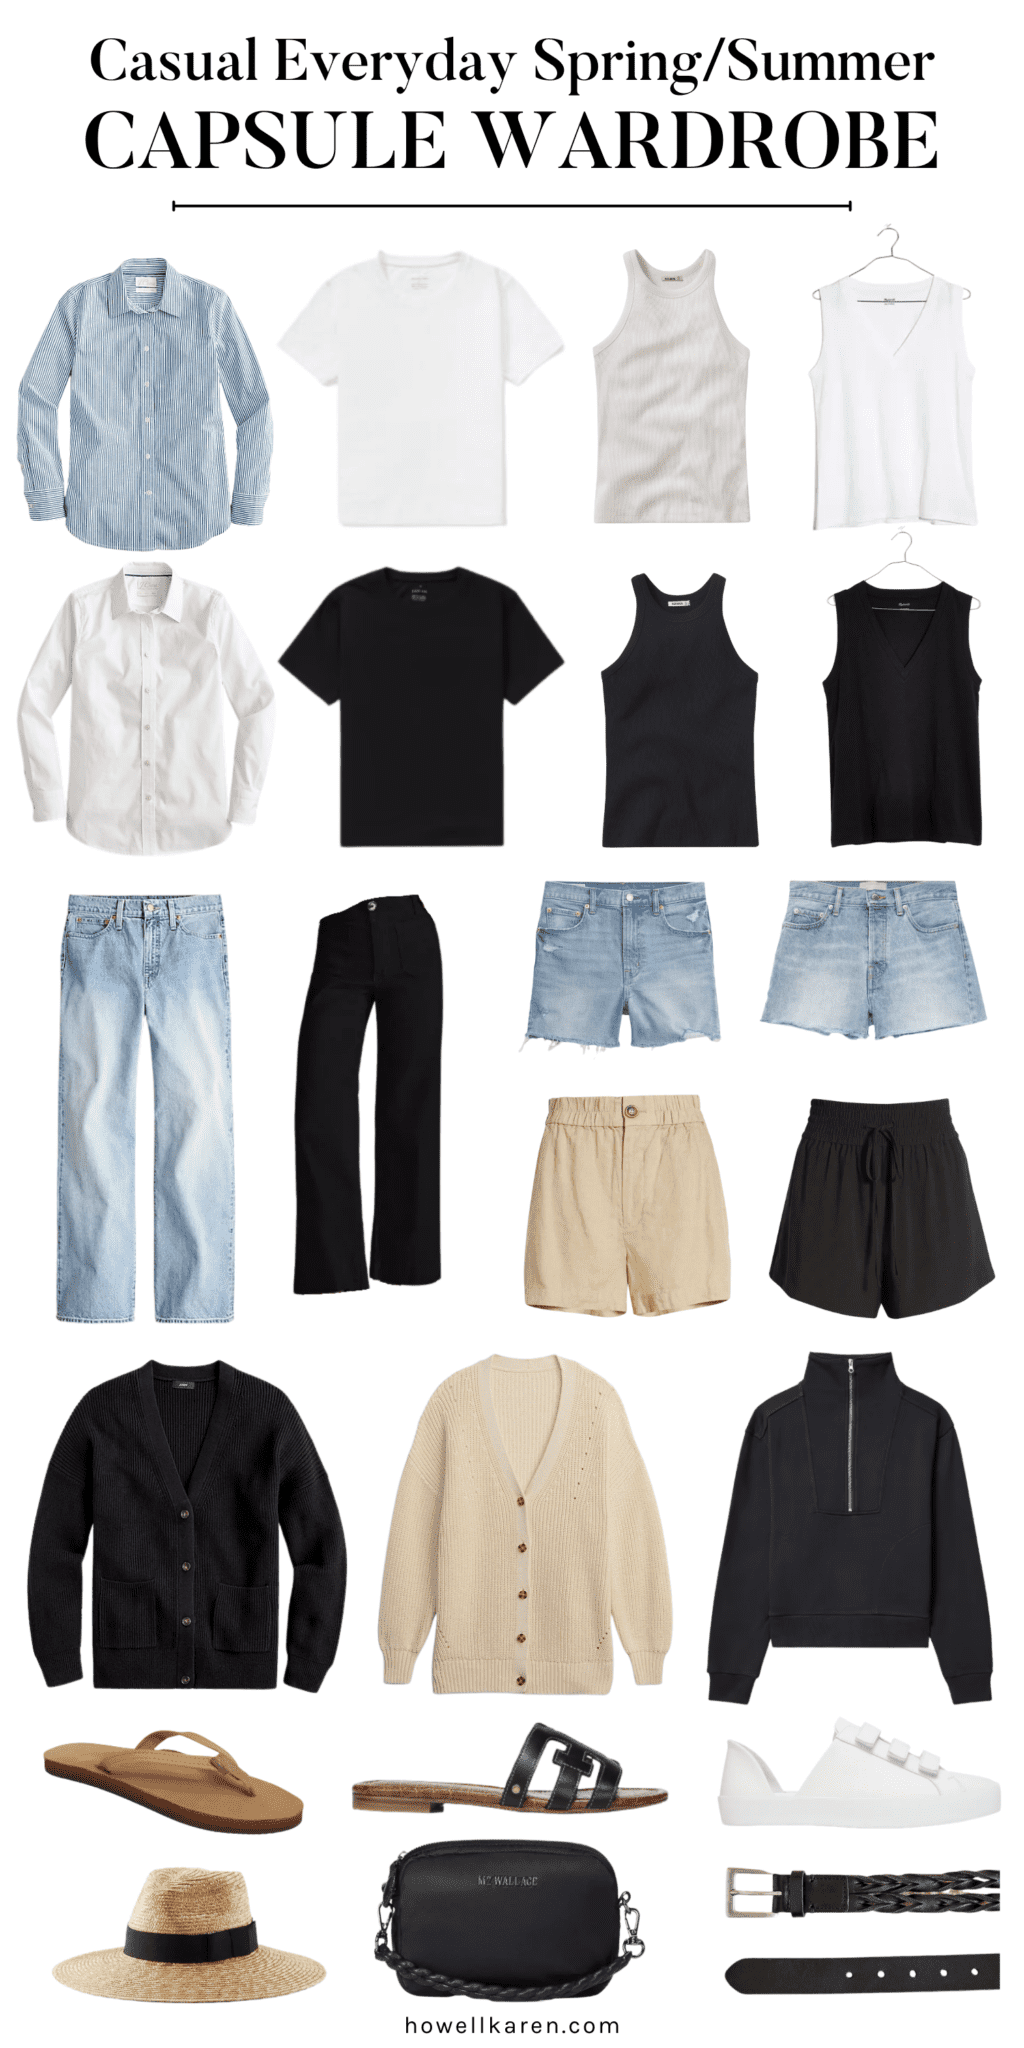 How To Build a Minimalist Capsule Wardrobe You Love